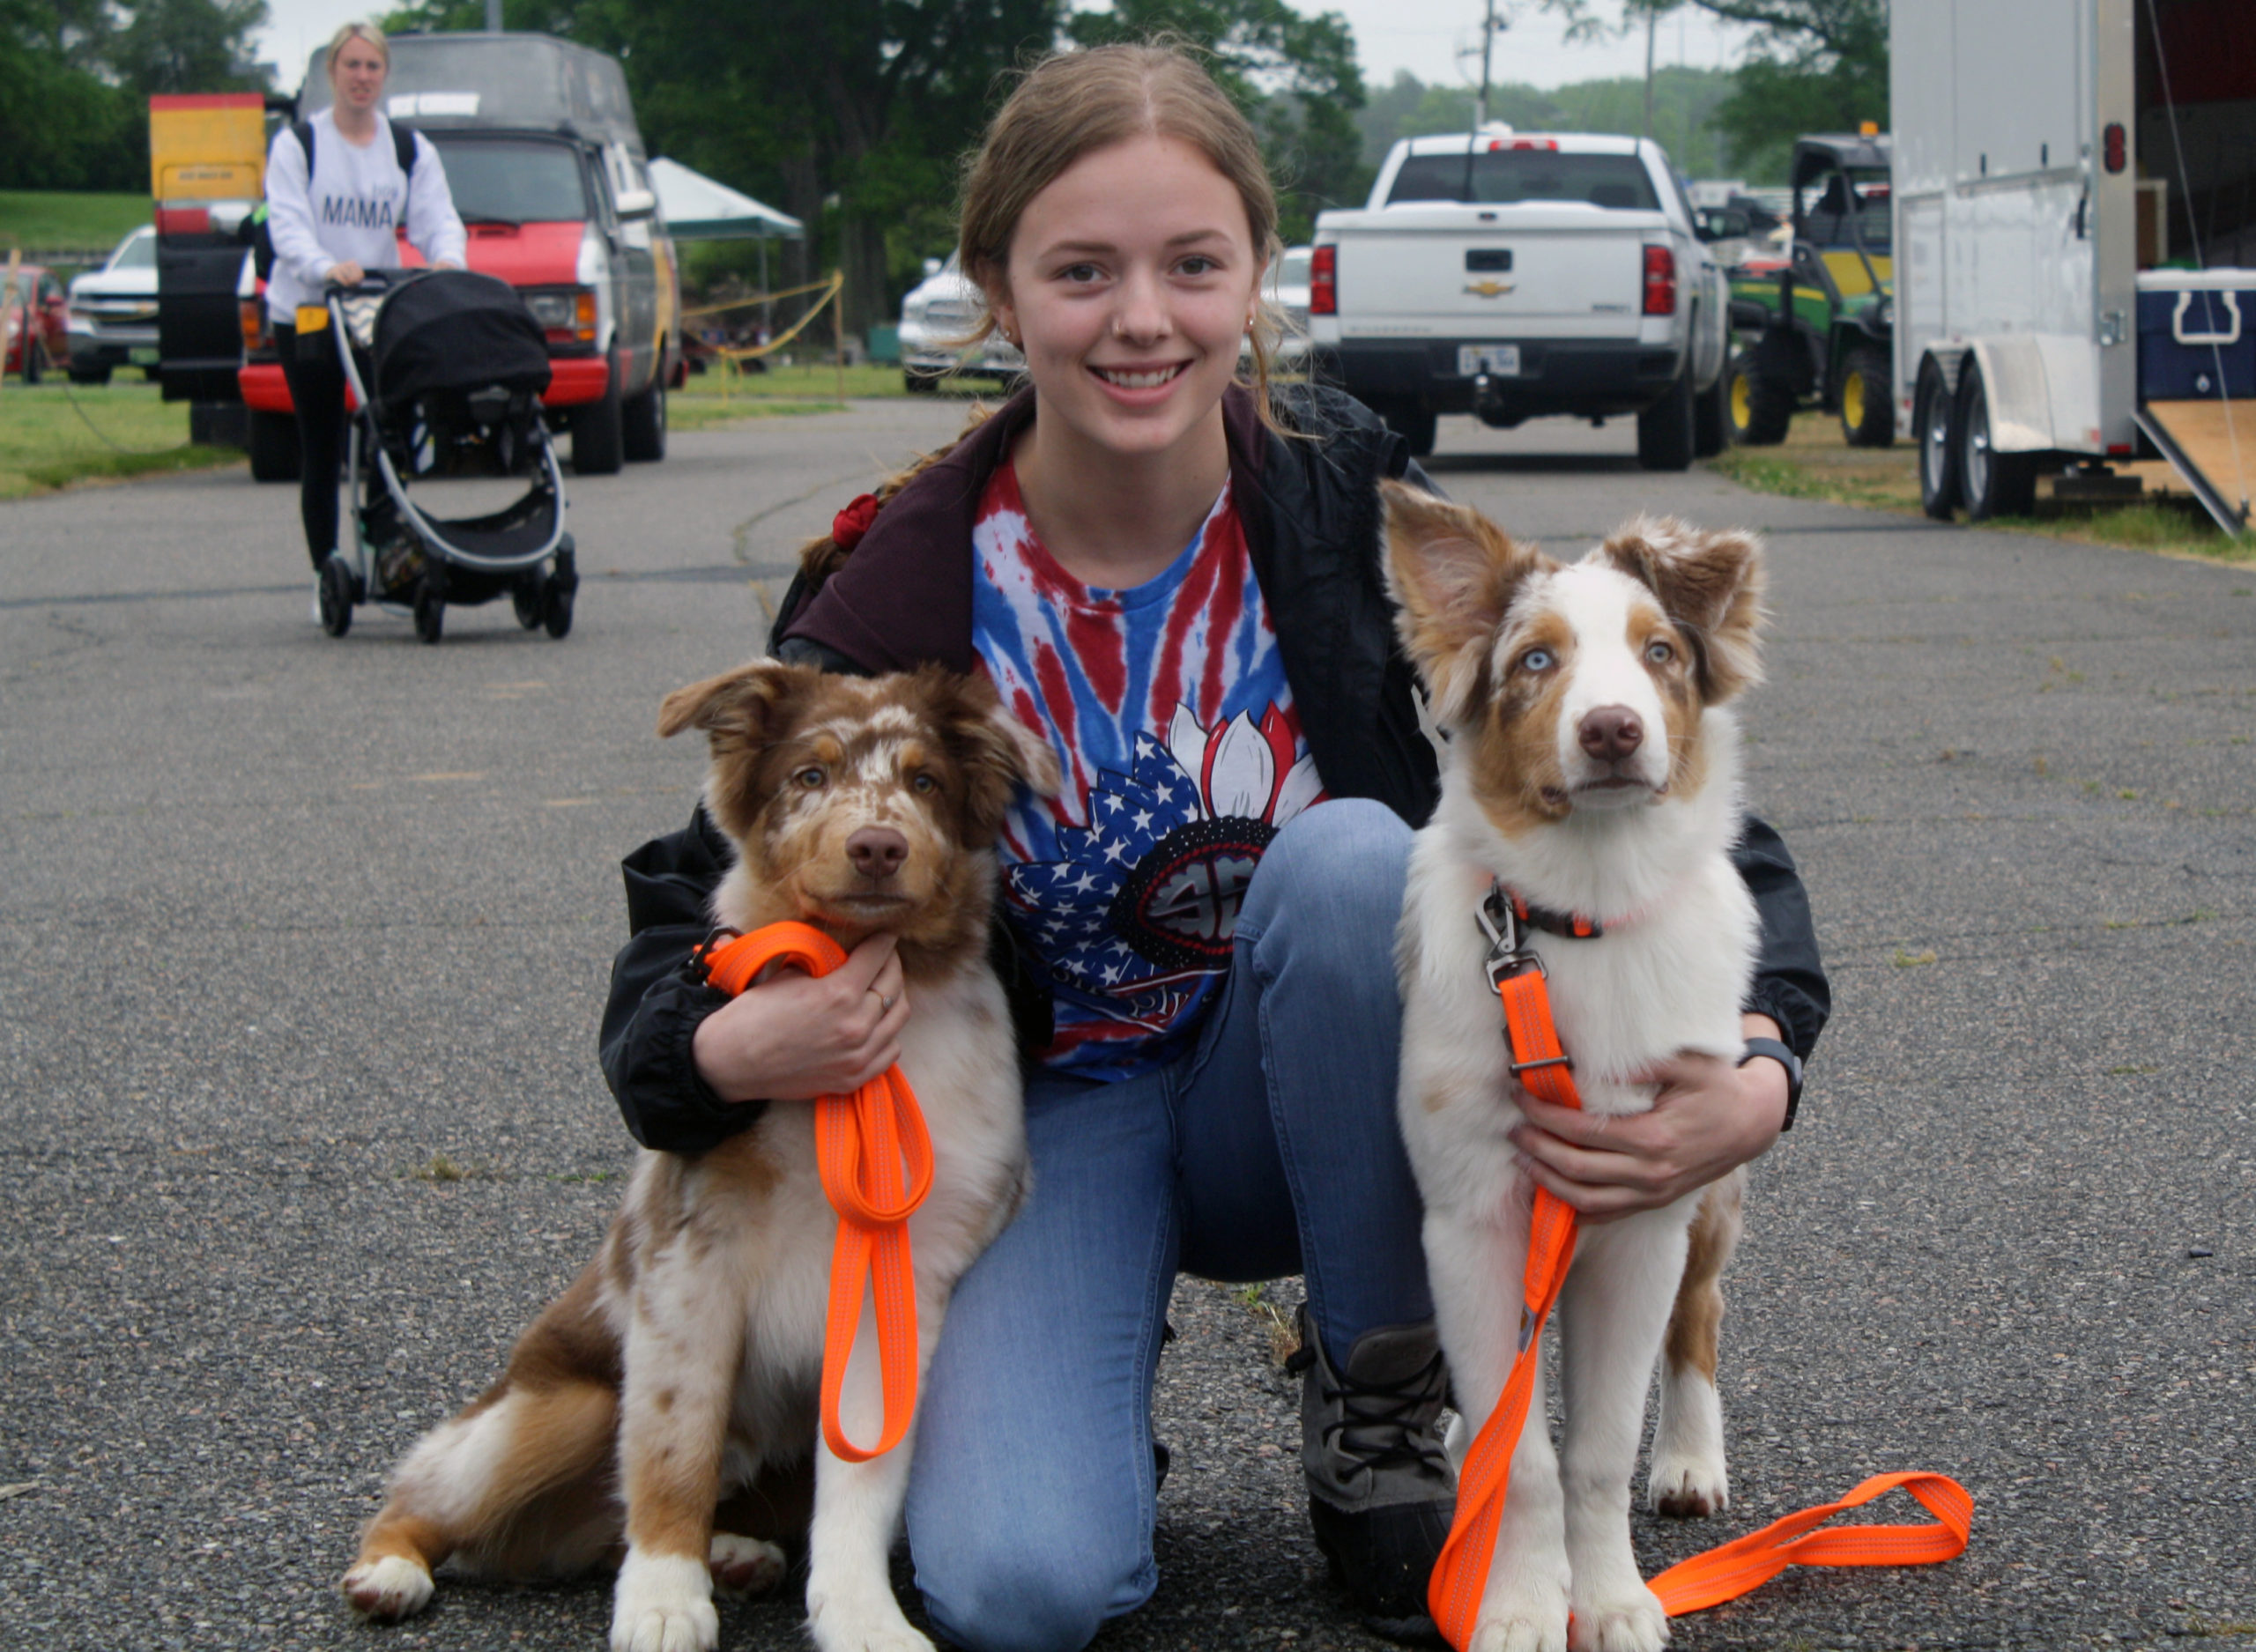 It's a ruff life - REC member Emma with Australian Shepherds Max and Odin.